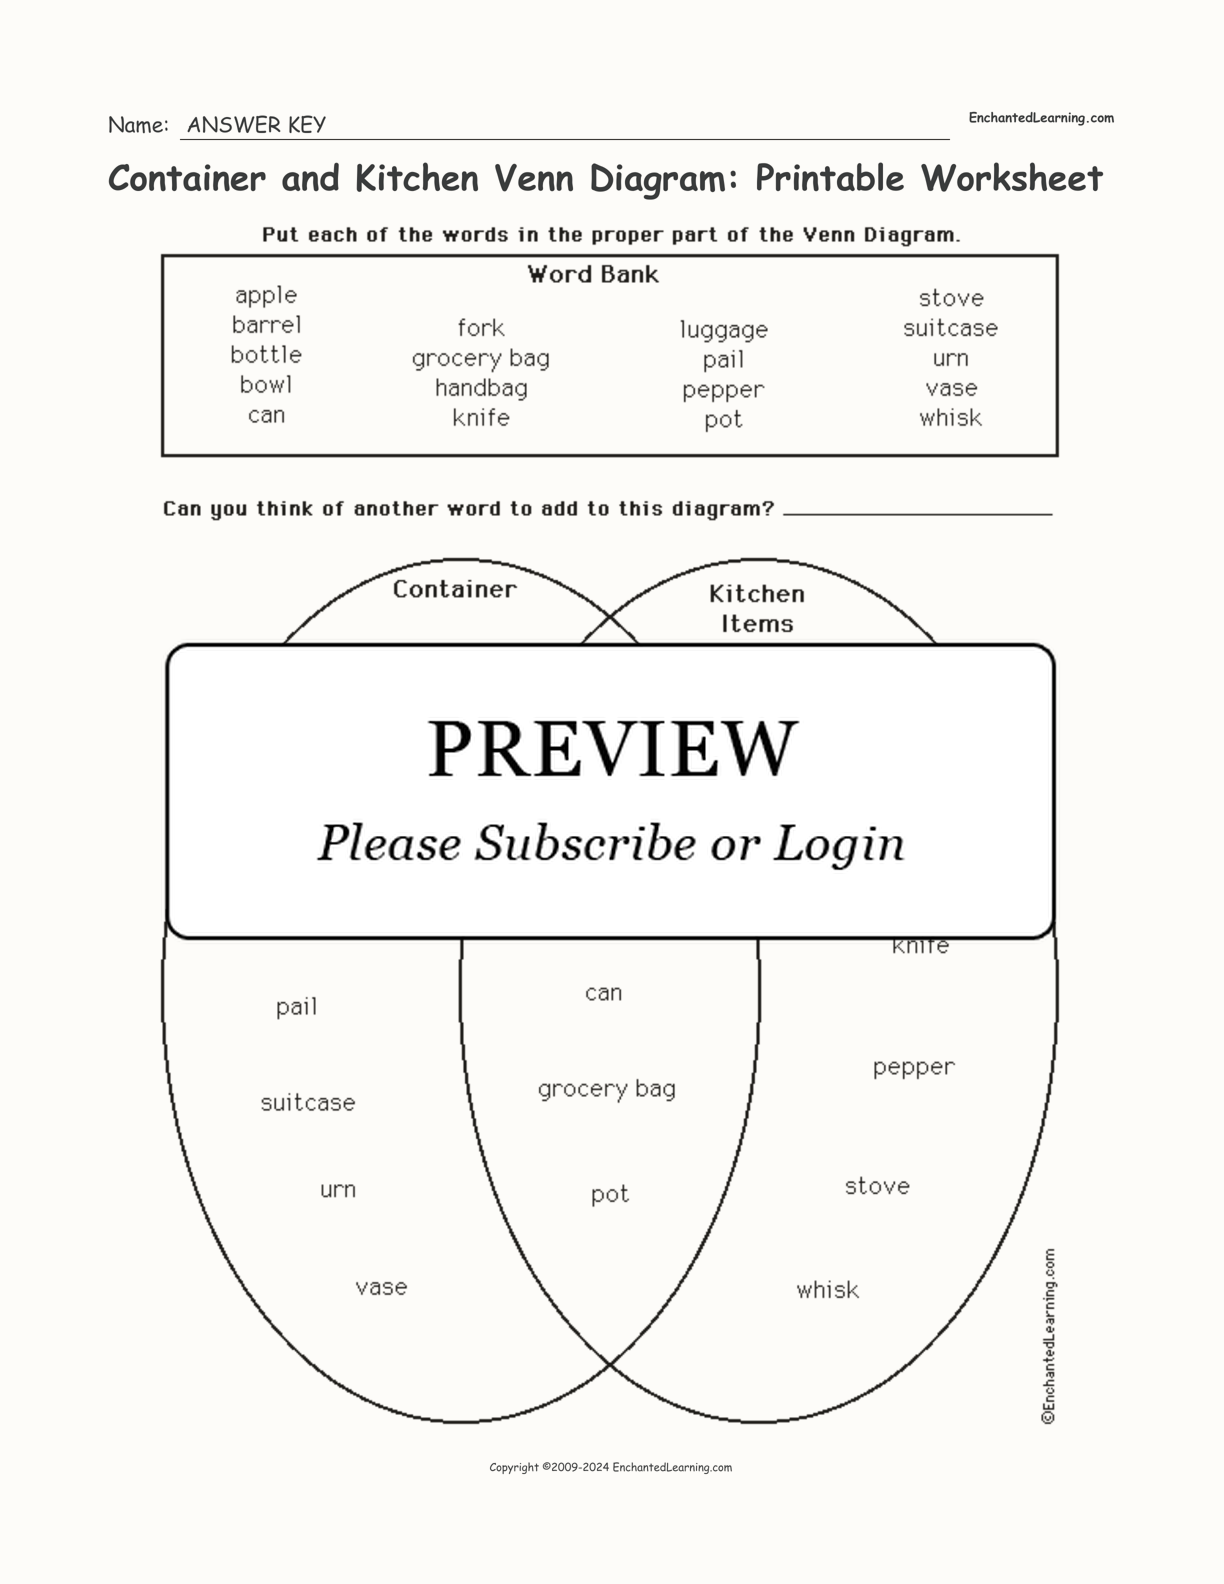 Container and Kitchen Venn Diagram: Printable Worksheet interactive worksheet page 2